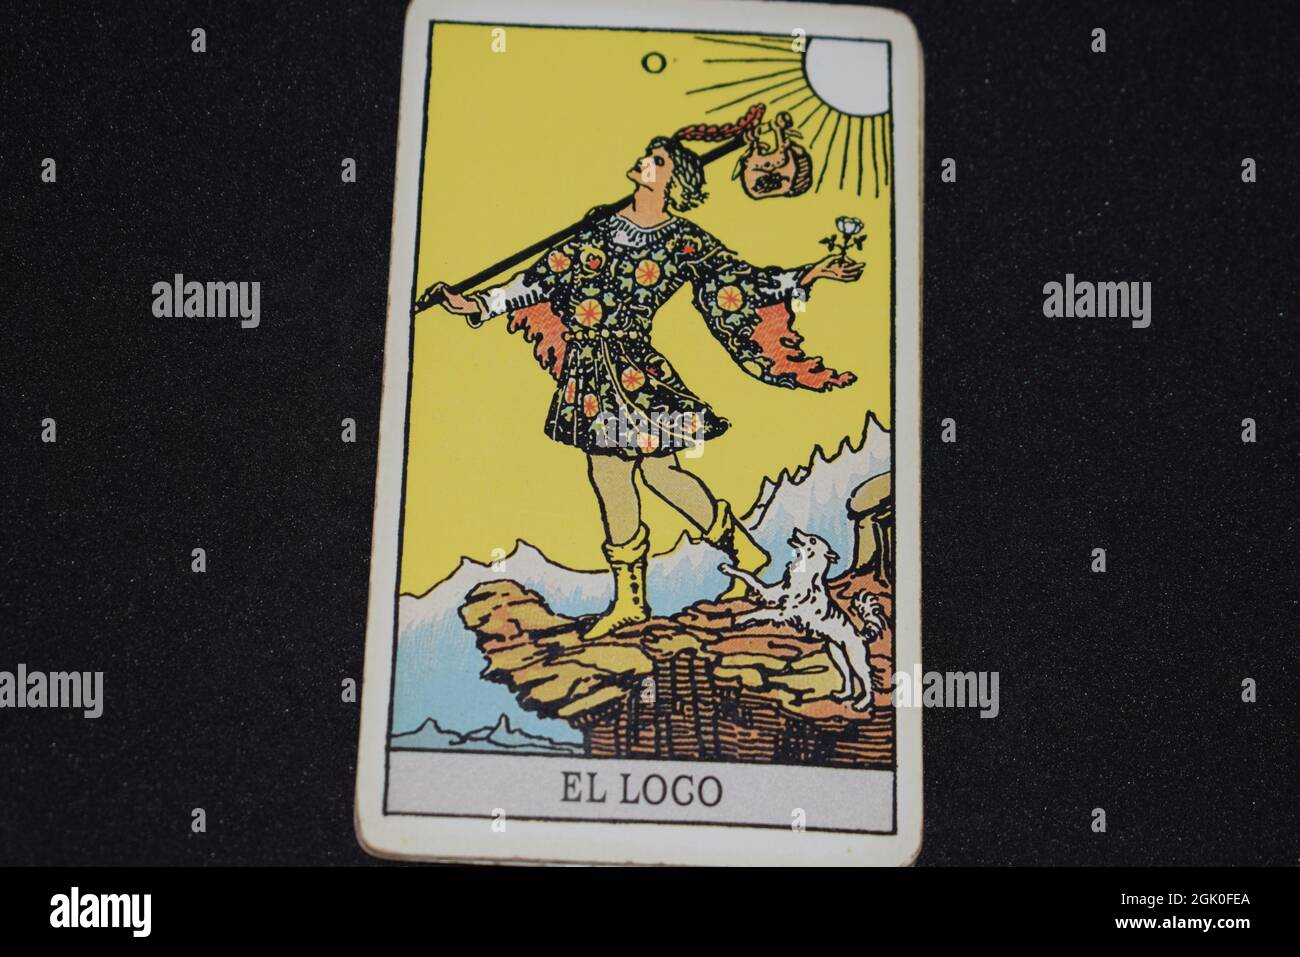 Tarot card number 0 represents THE FOOL in the tarot cards of the major arcana on a black background. Stock Photo